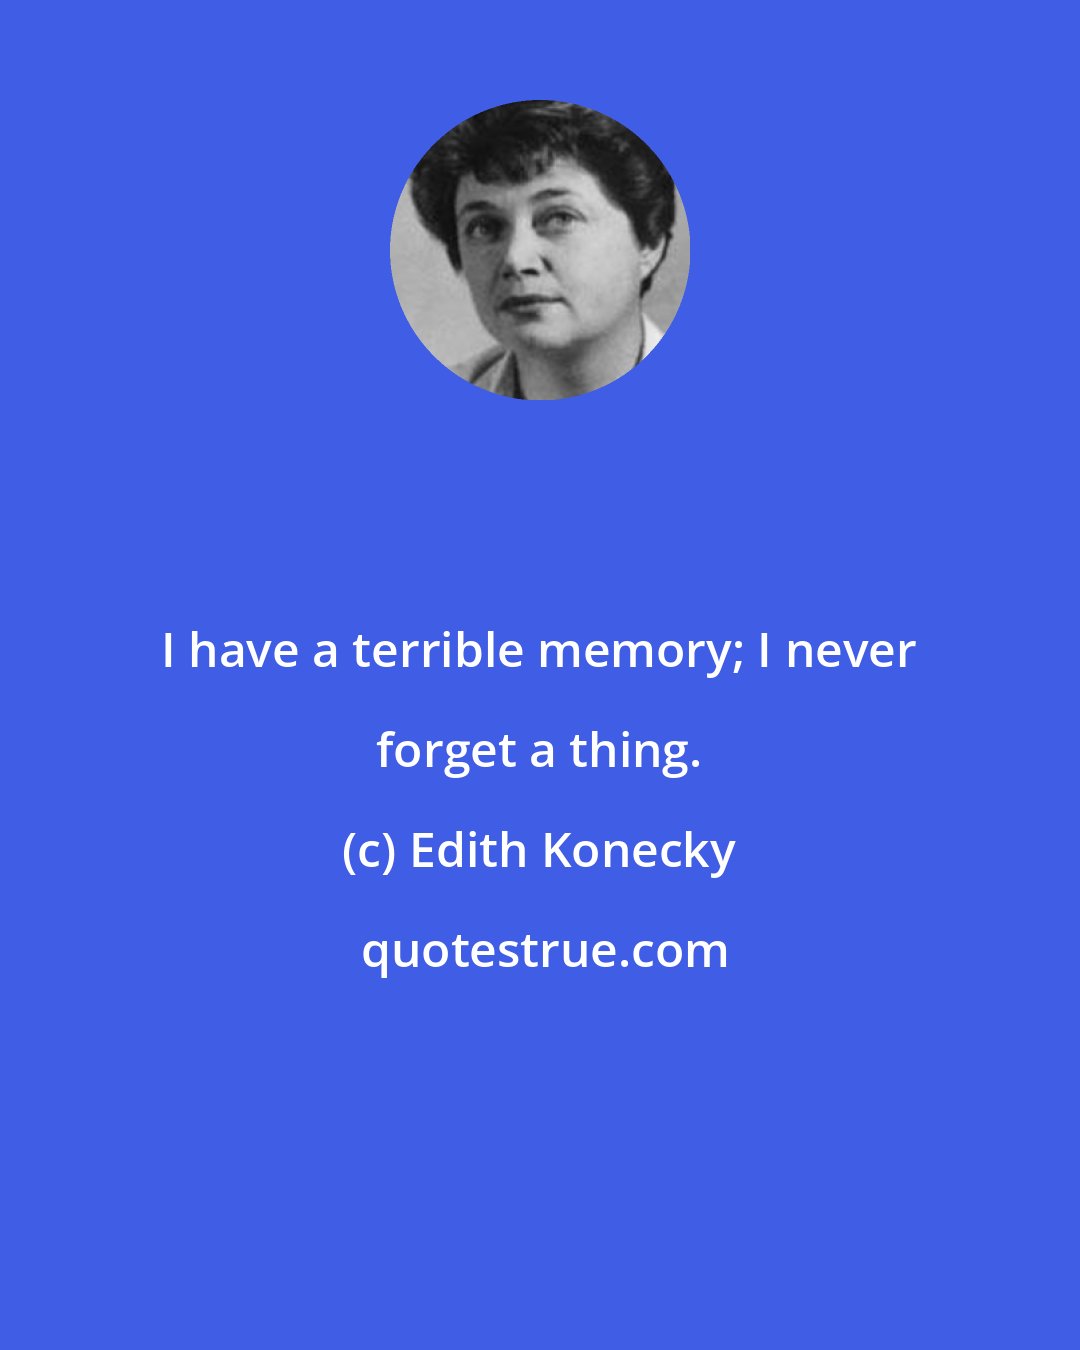 Edith Konecky: I have a terrible memory; I never forget a thing.